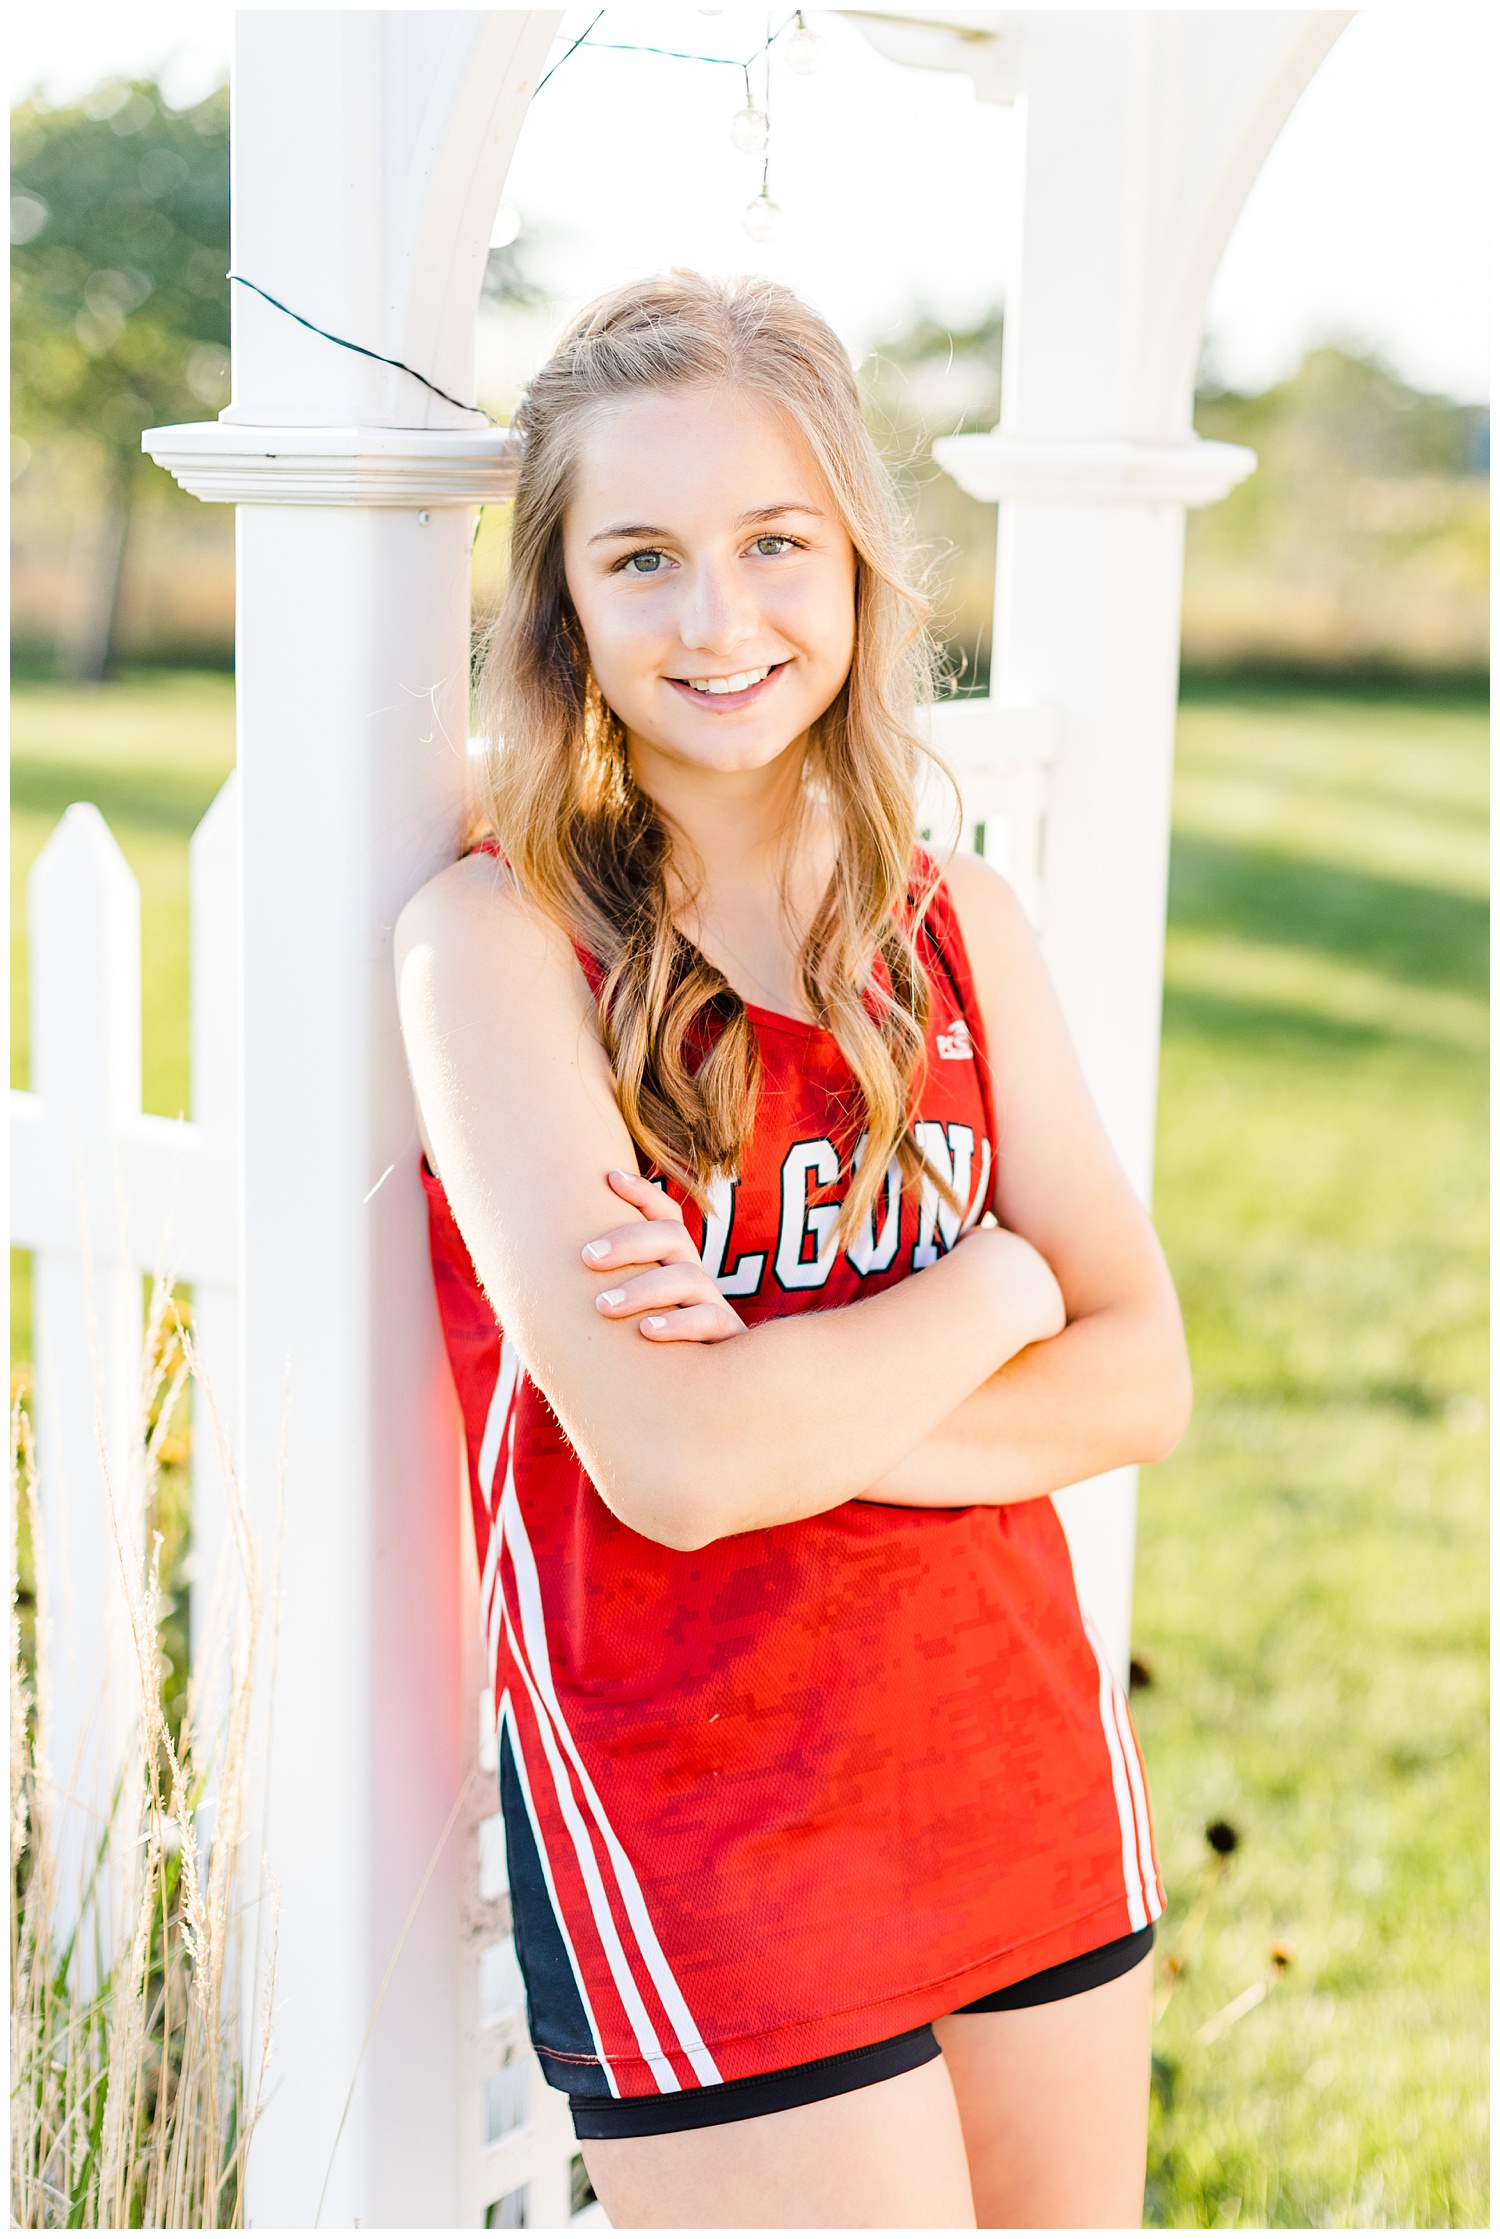 Taylor leans against a white arbor in her front yard wearing an Algona High cross country jersey | CB Studio